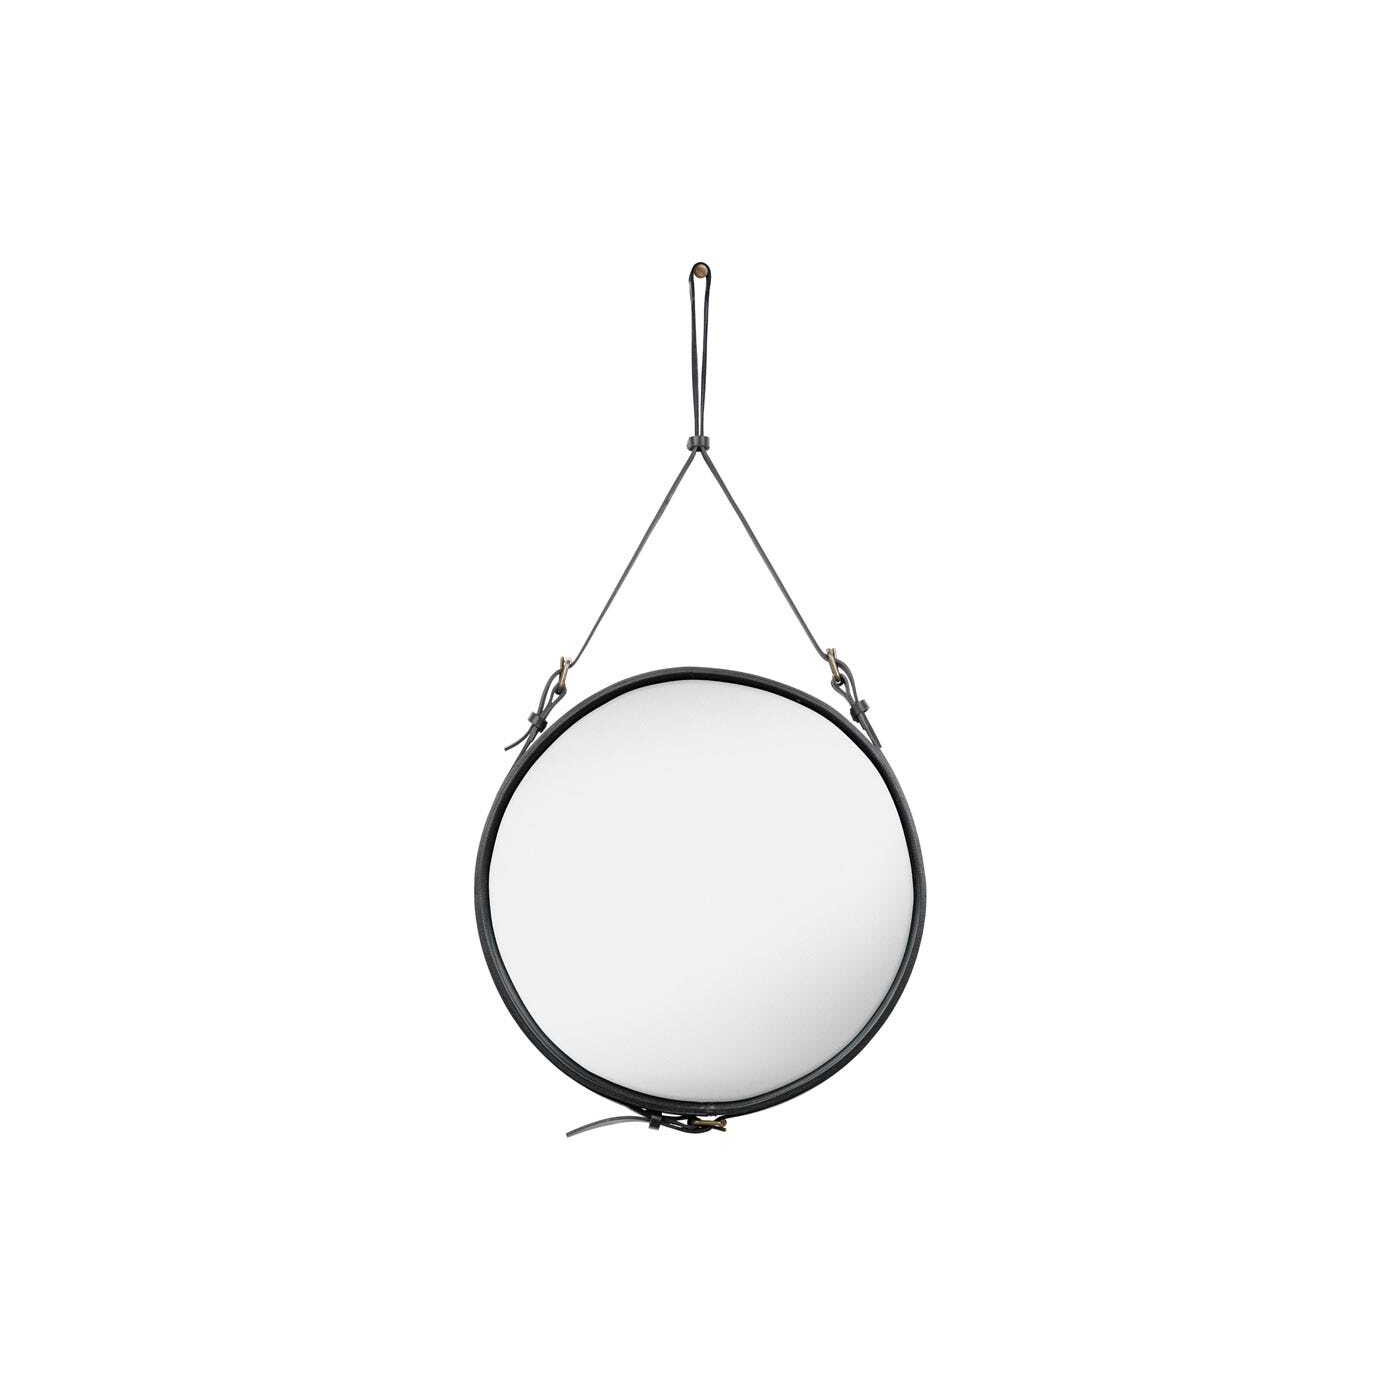 Gubi Adnet Wall Mirror Small Black Leather - image 1